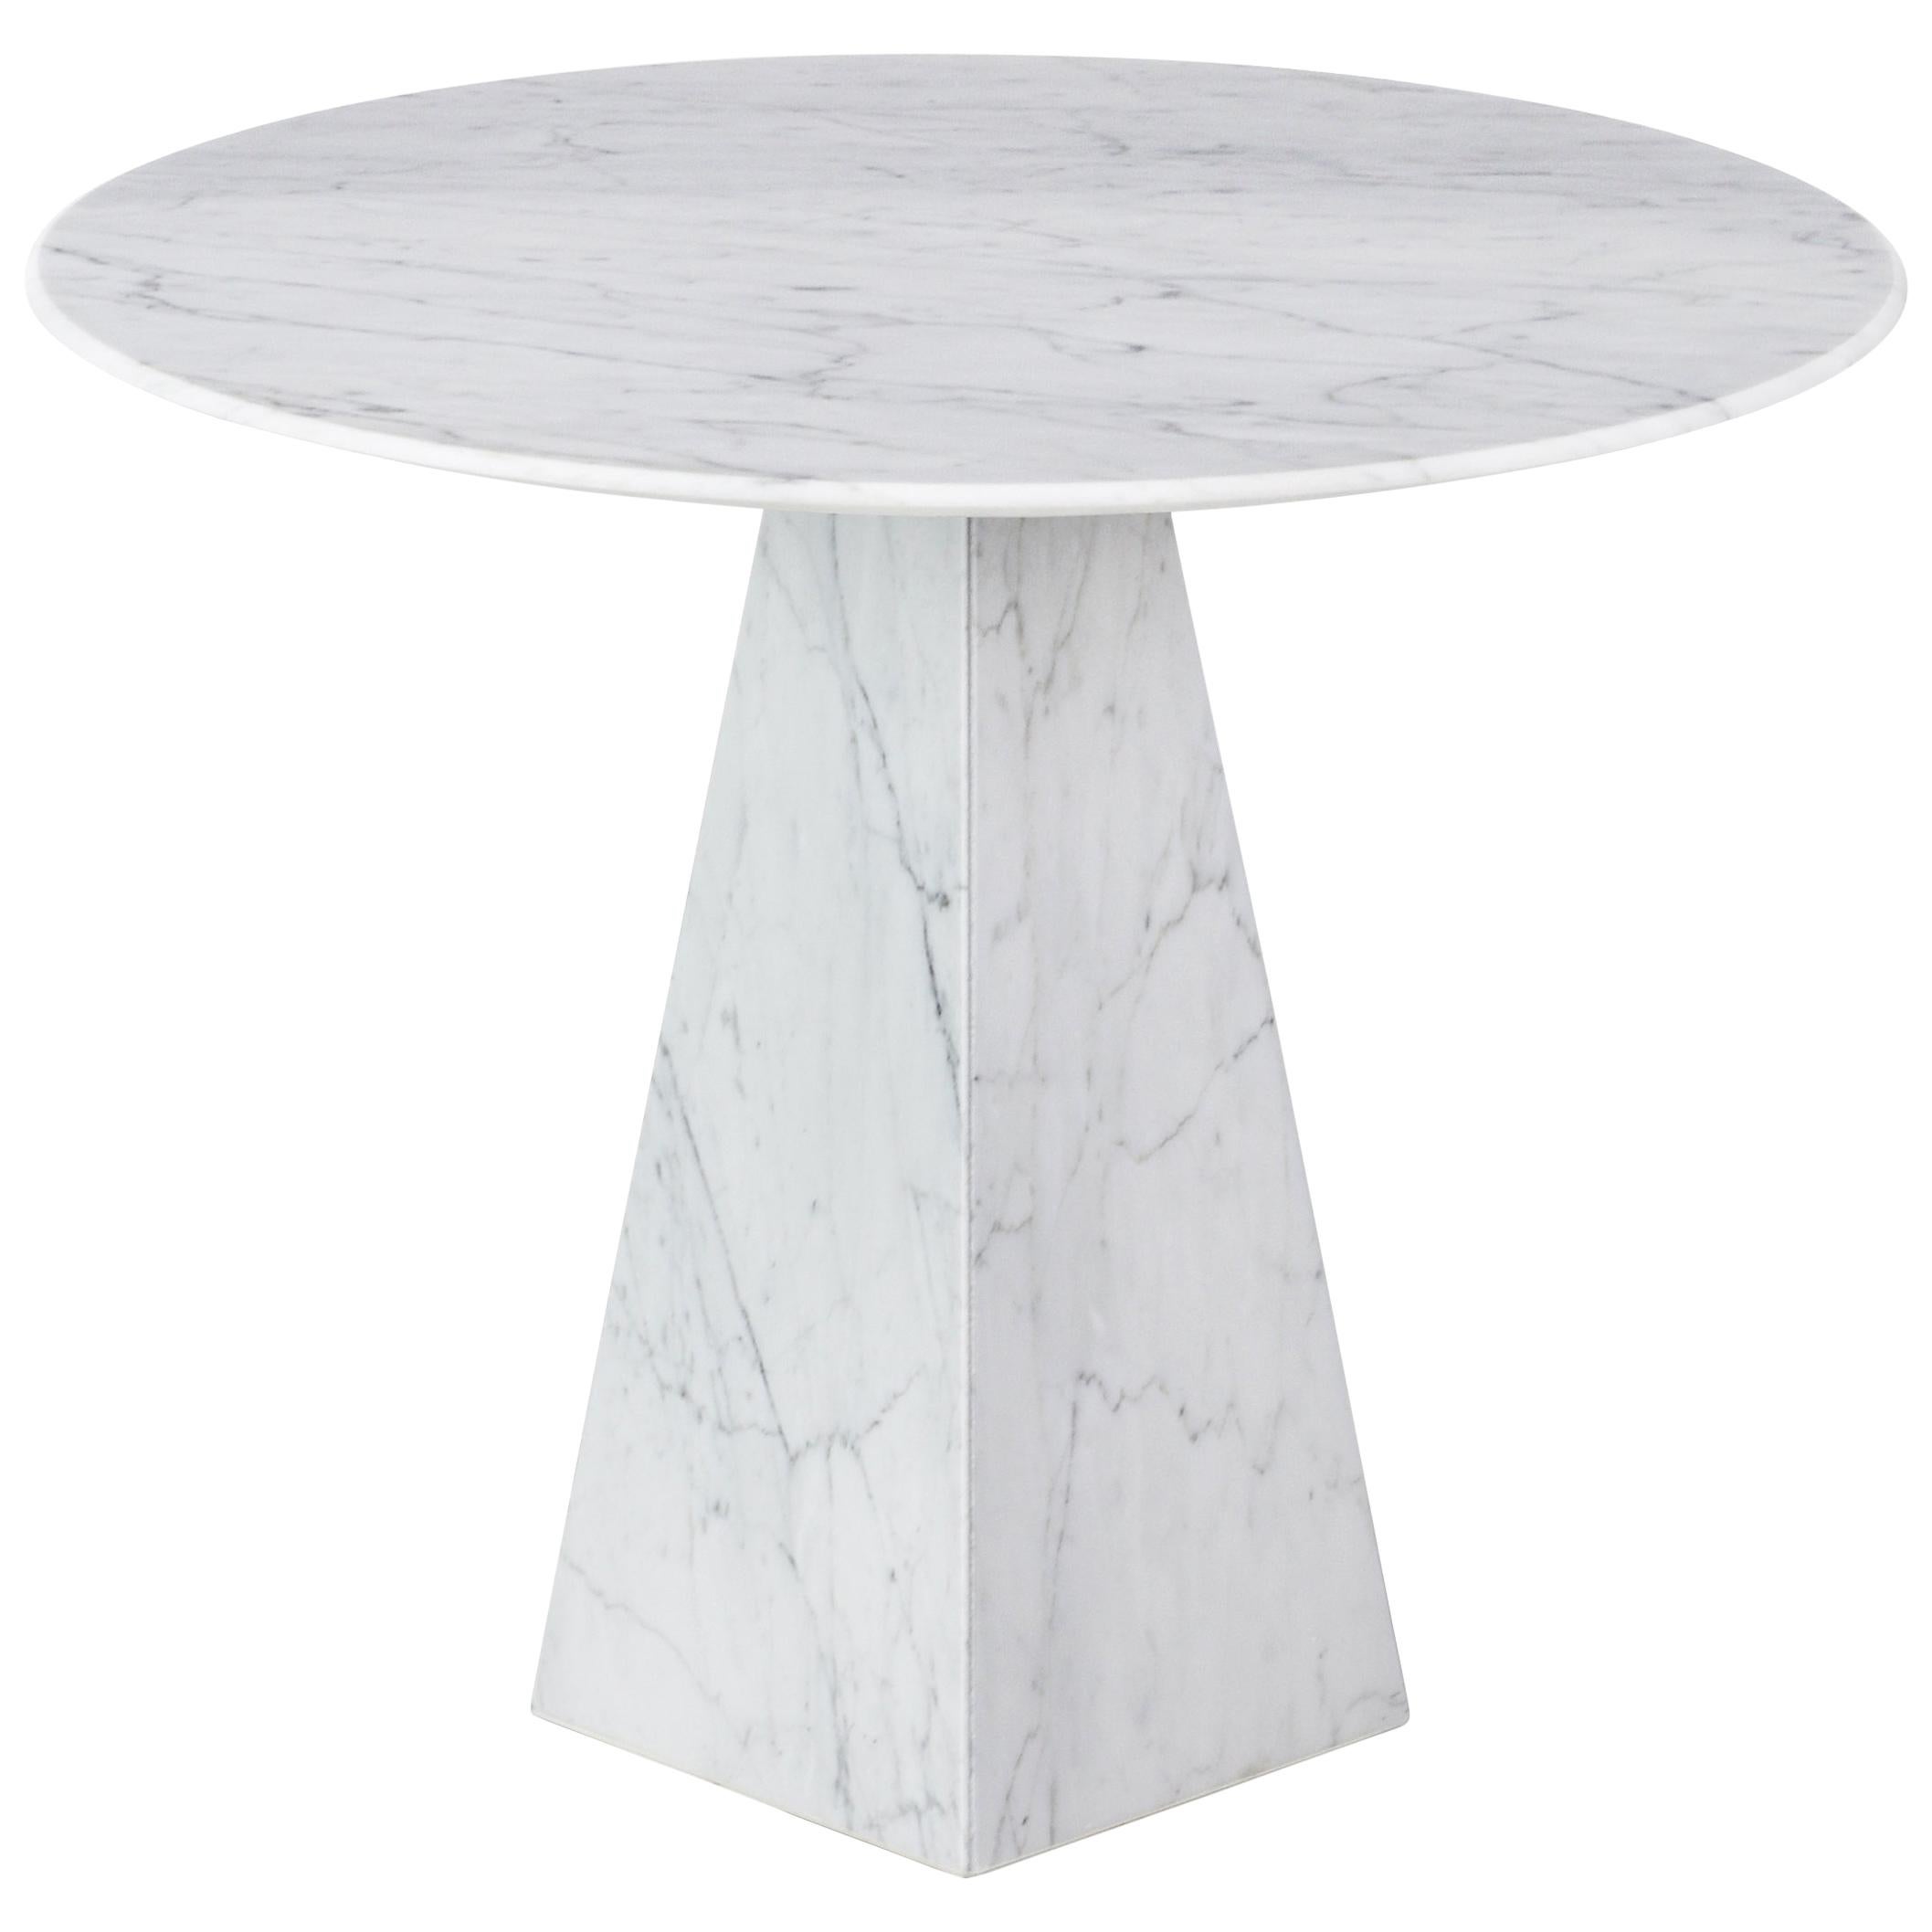 Pair of Ultra Thin White Carrara Marble Round Sidetable For Sale